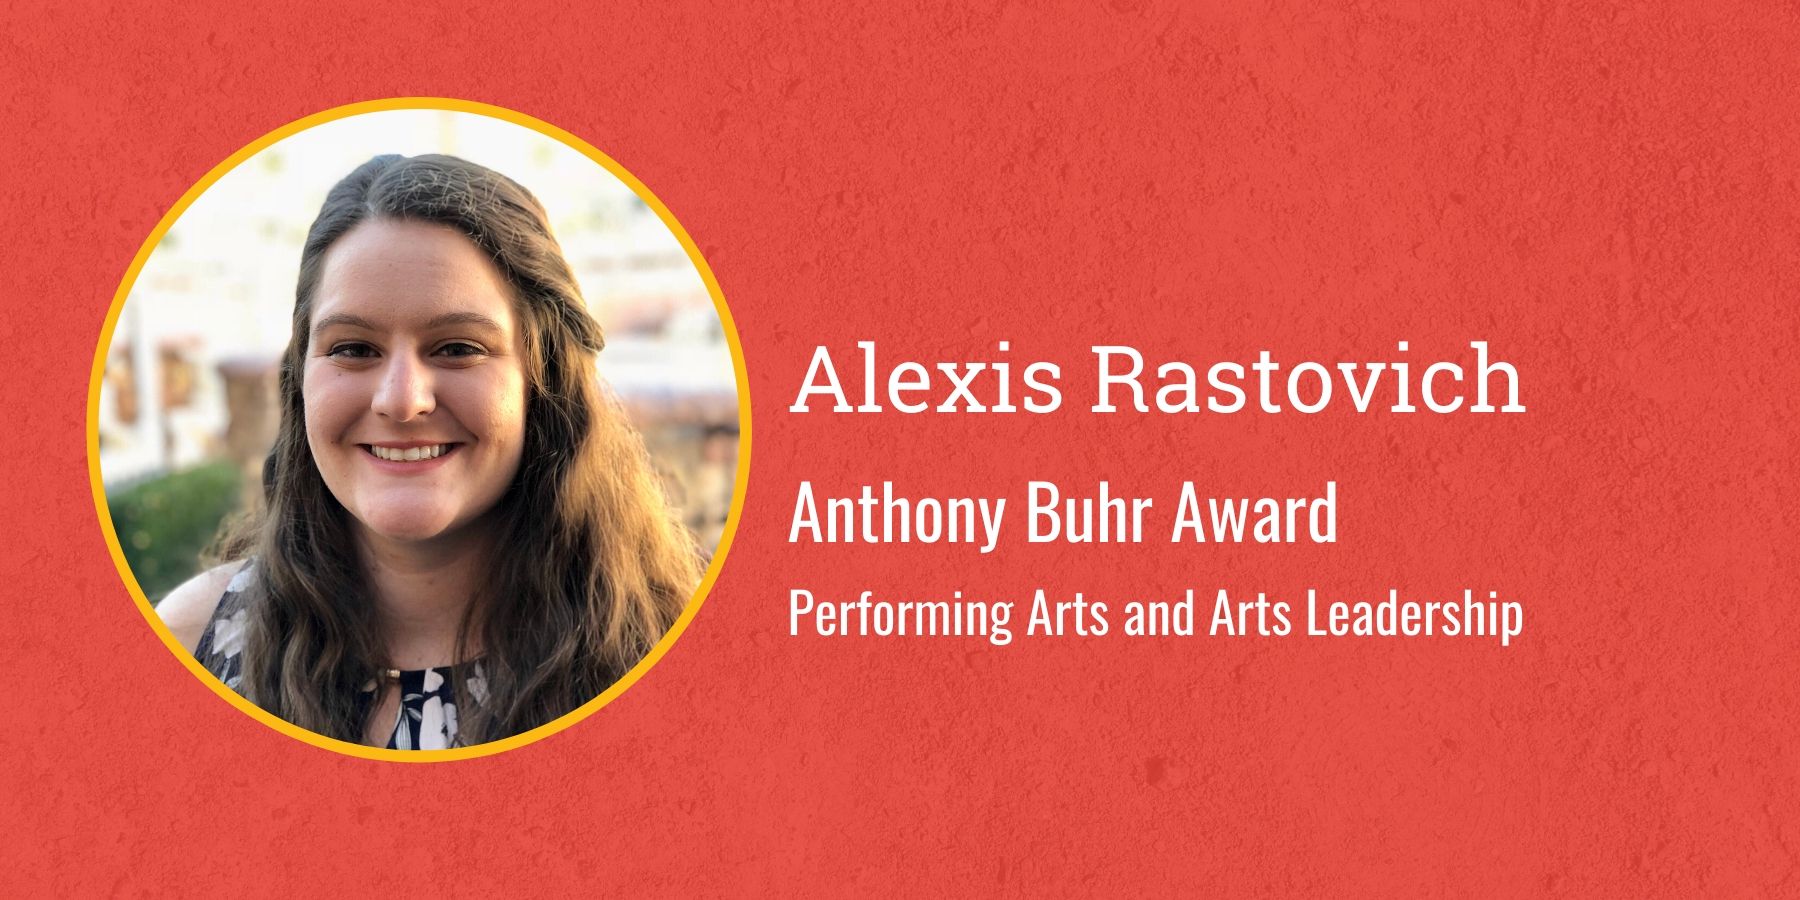 Photo of Alexis Rastovich, Anthony Buhr Award, Performing Arts and Arts Leadership